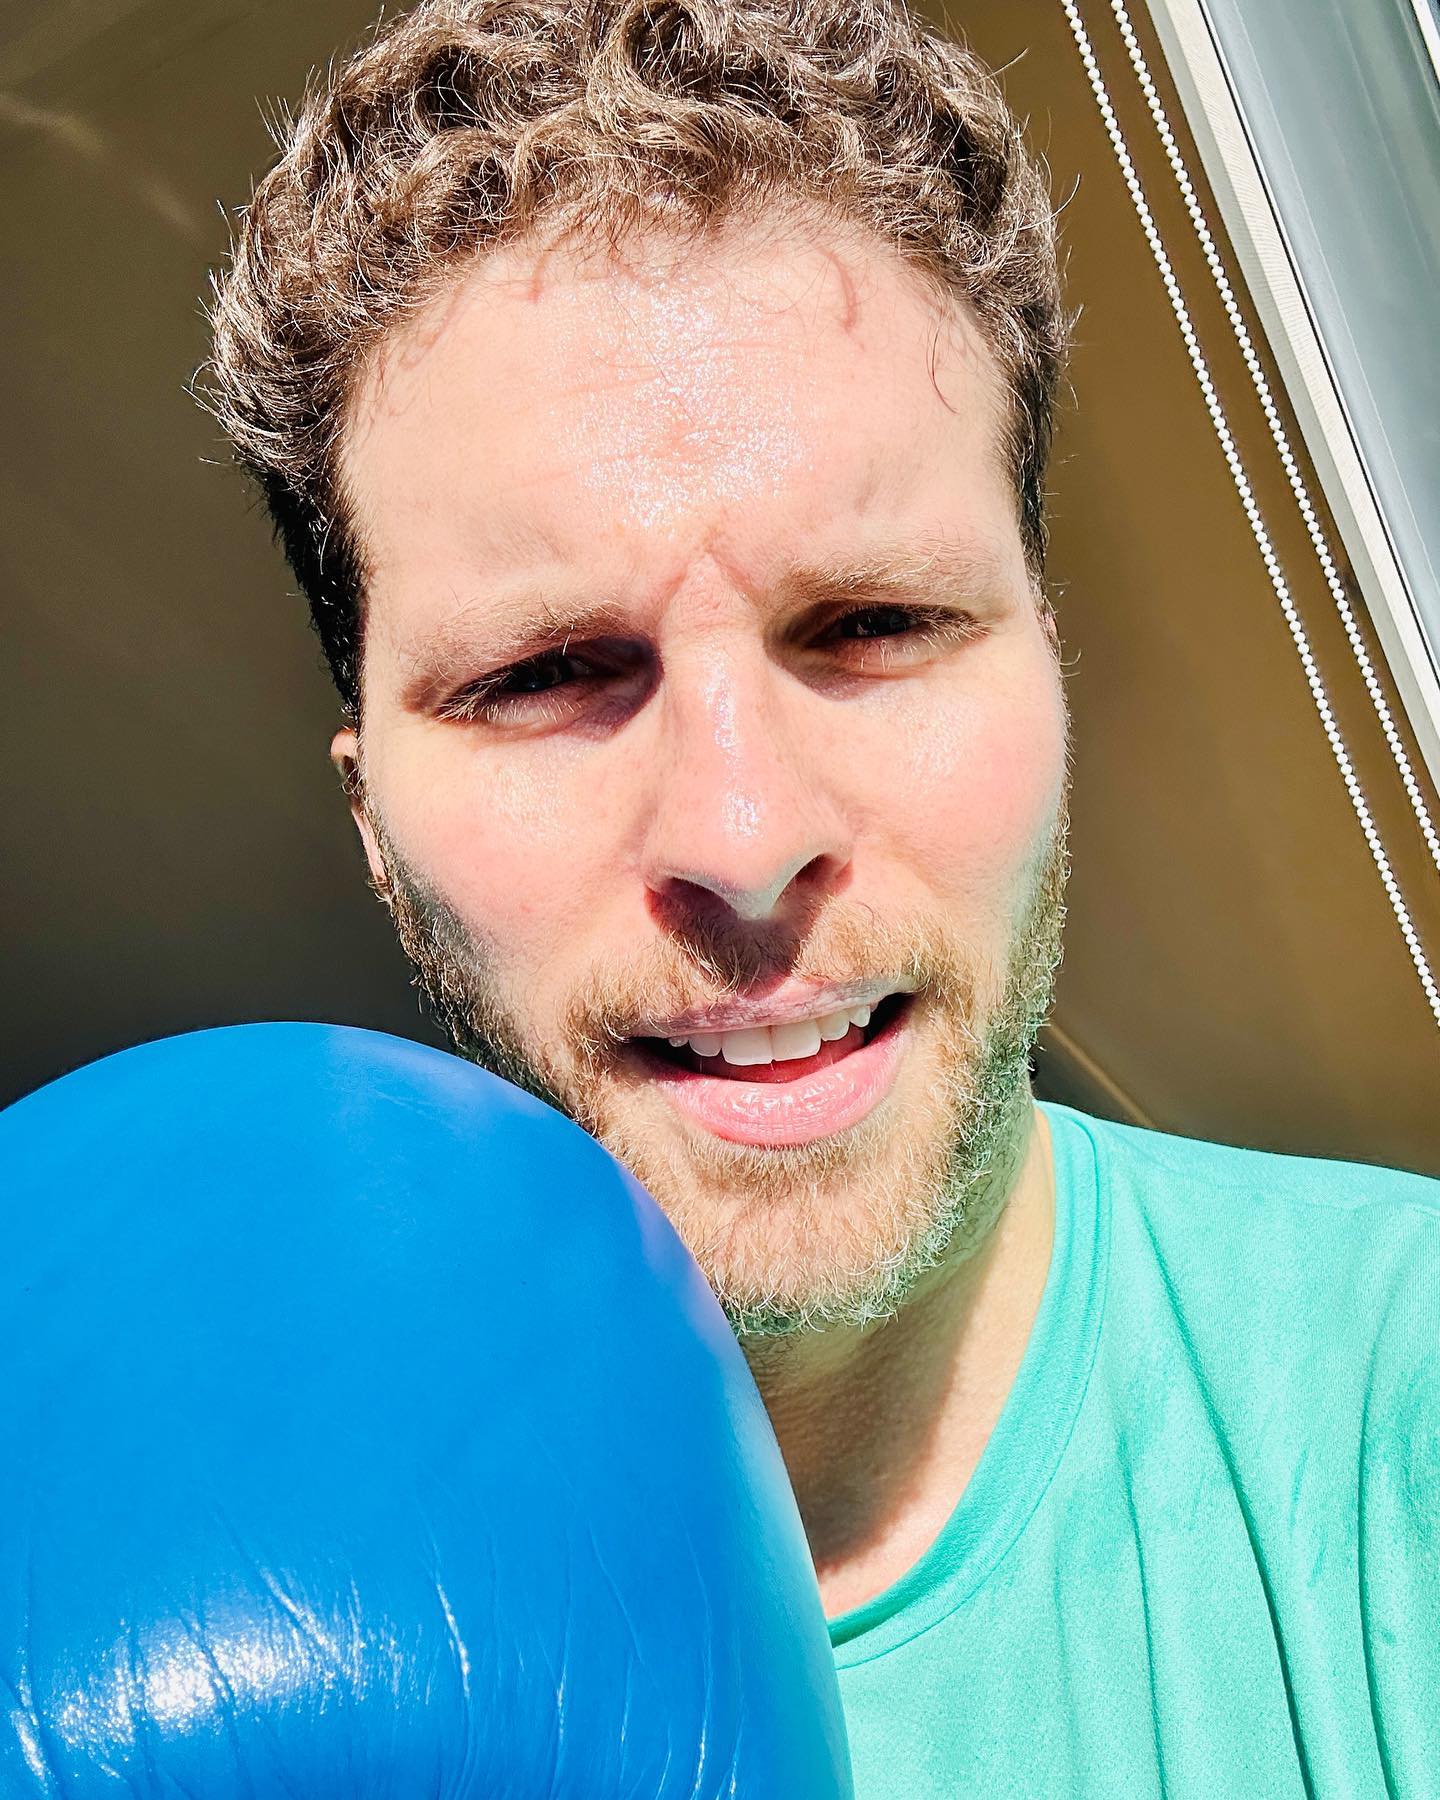 https://e.radikal.host/2023/04/20/Photo-by-Thiago-Fragoso-on-April-11-2023.-May-be-a-selfie-of-1-person-balloon-punching-bag-beach-ball-and-ball..jpg